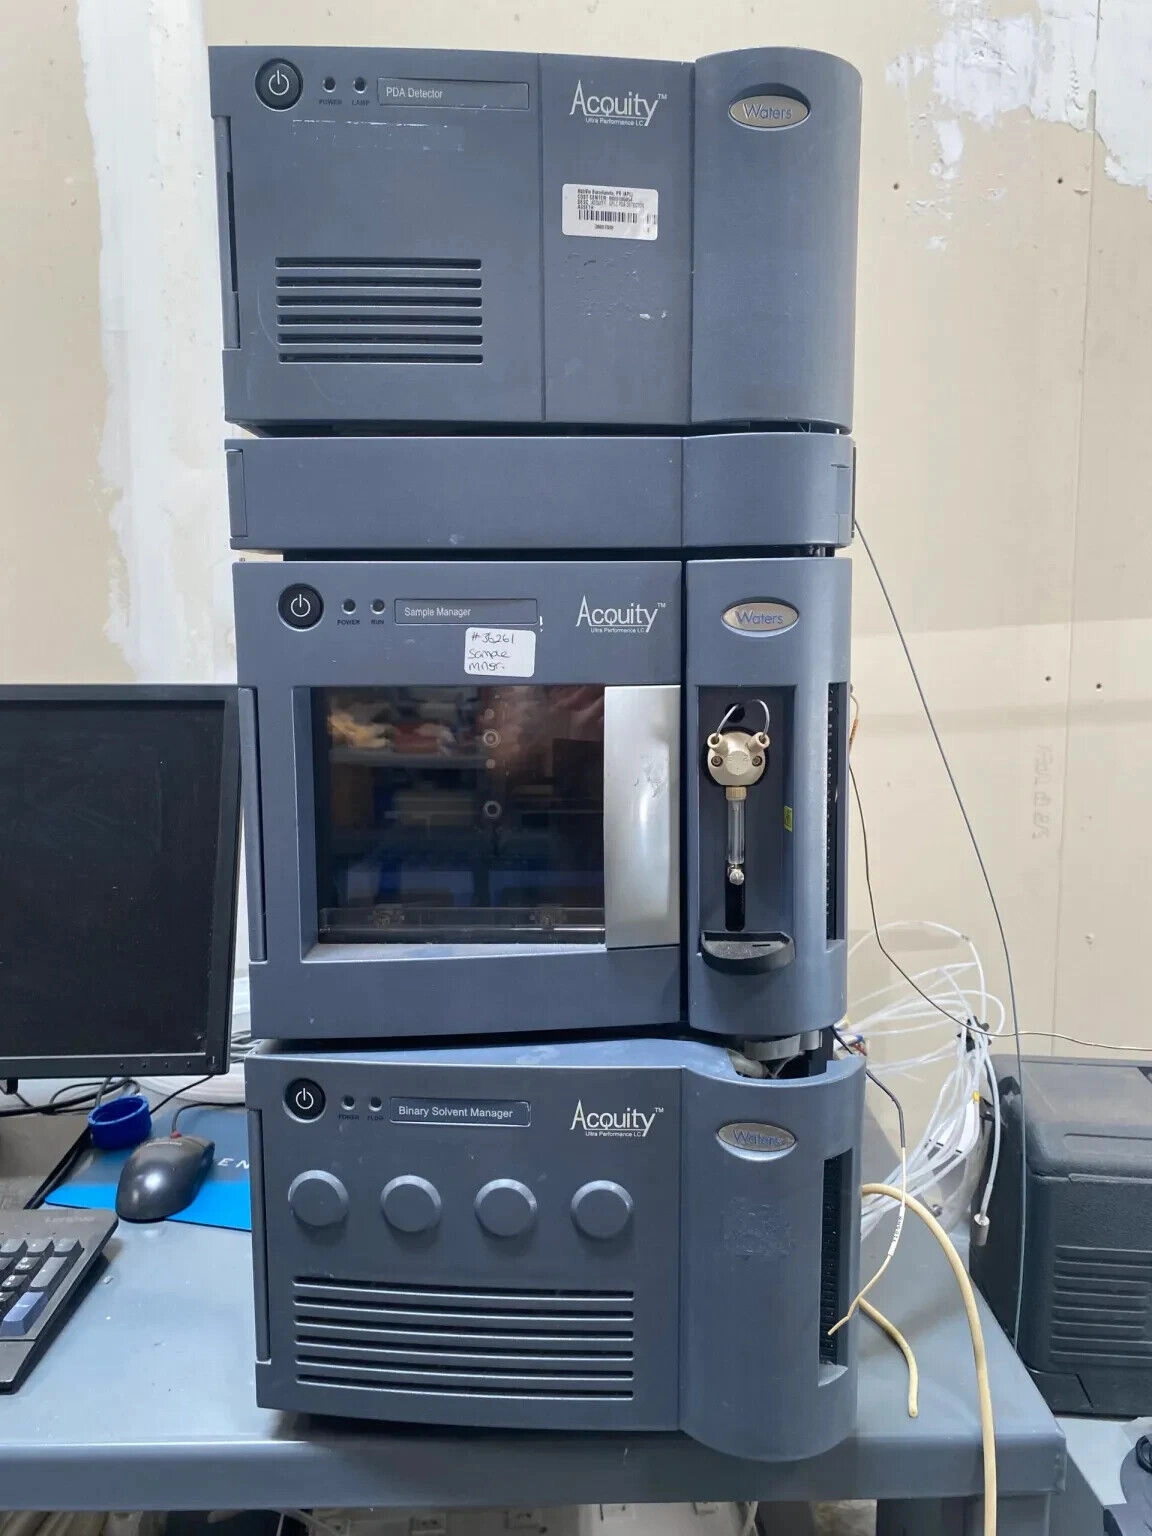 Waters - Acquity HPLC with PDA detector